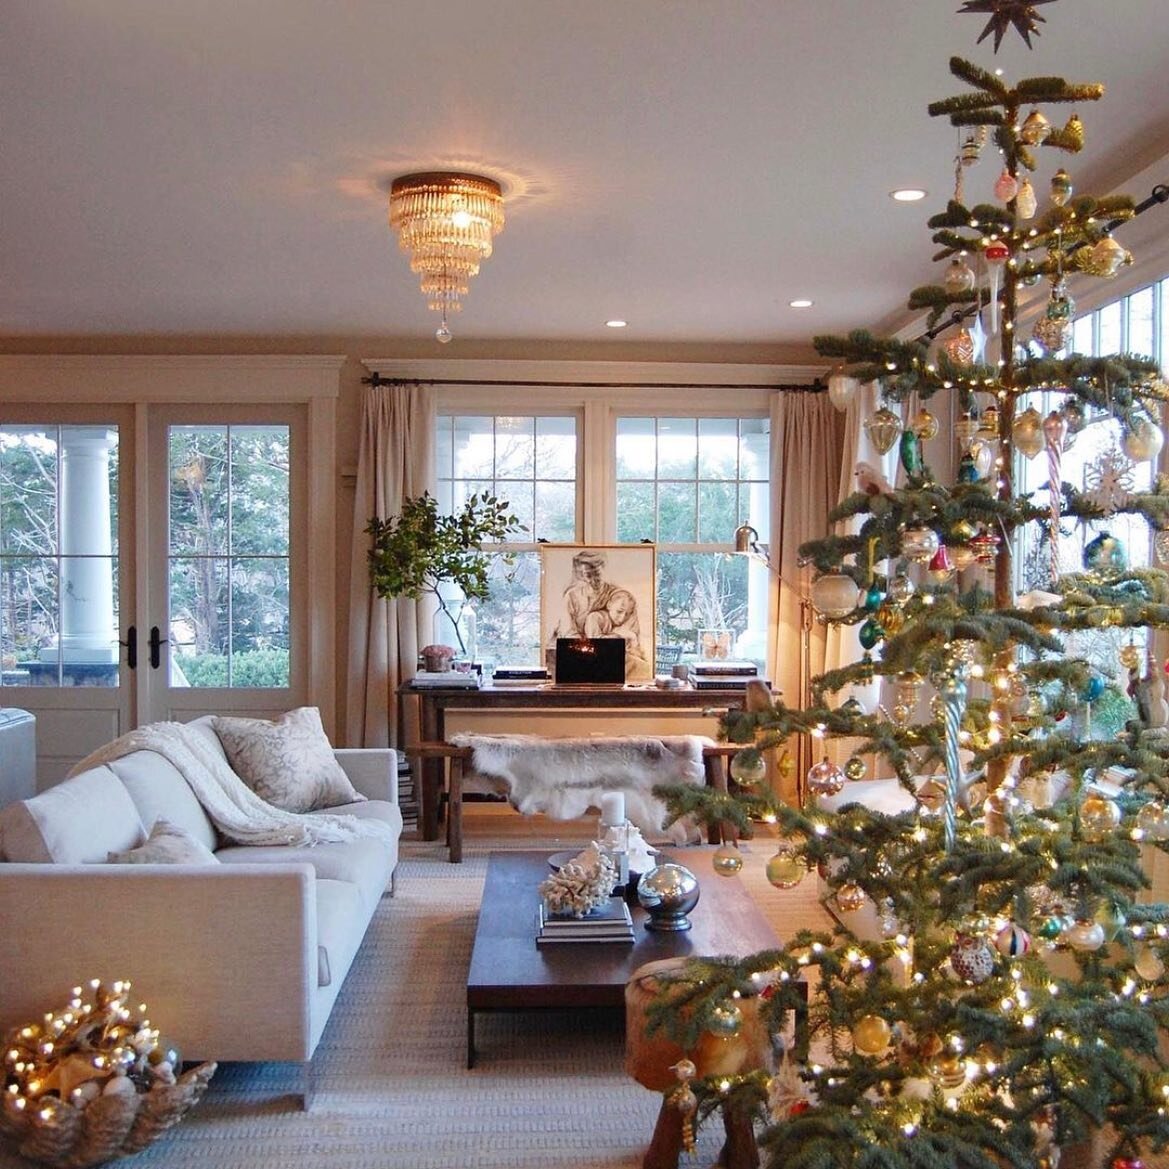 WOW...loving this holiday living room from @oldsilvershed ❤️ I can&rsquo;t wait to decorate for Christmas but something tells me my living room won&rsquo;t look quite this good. #holidaydecor